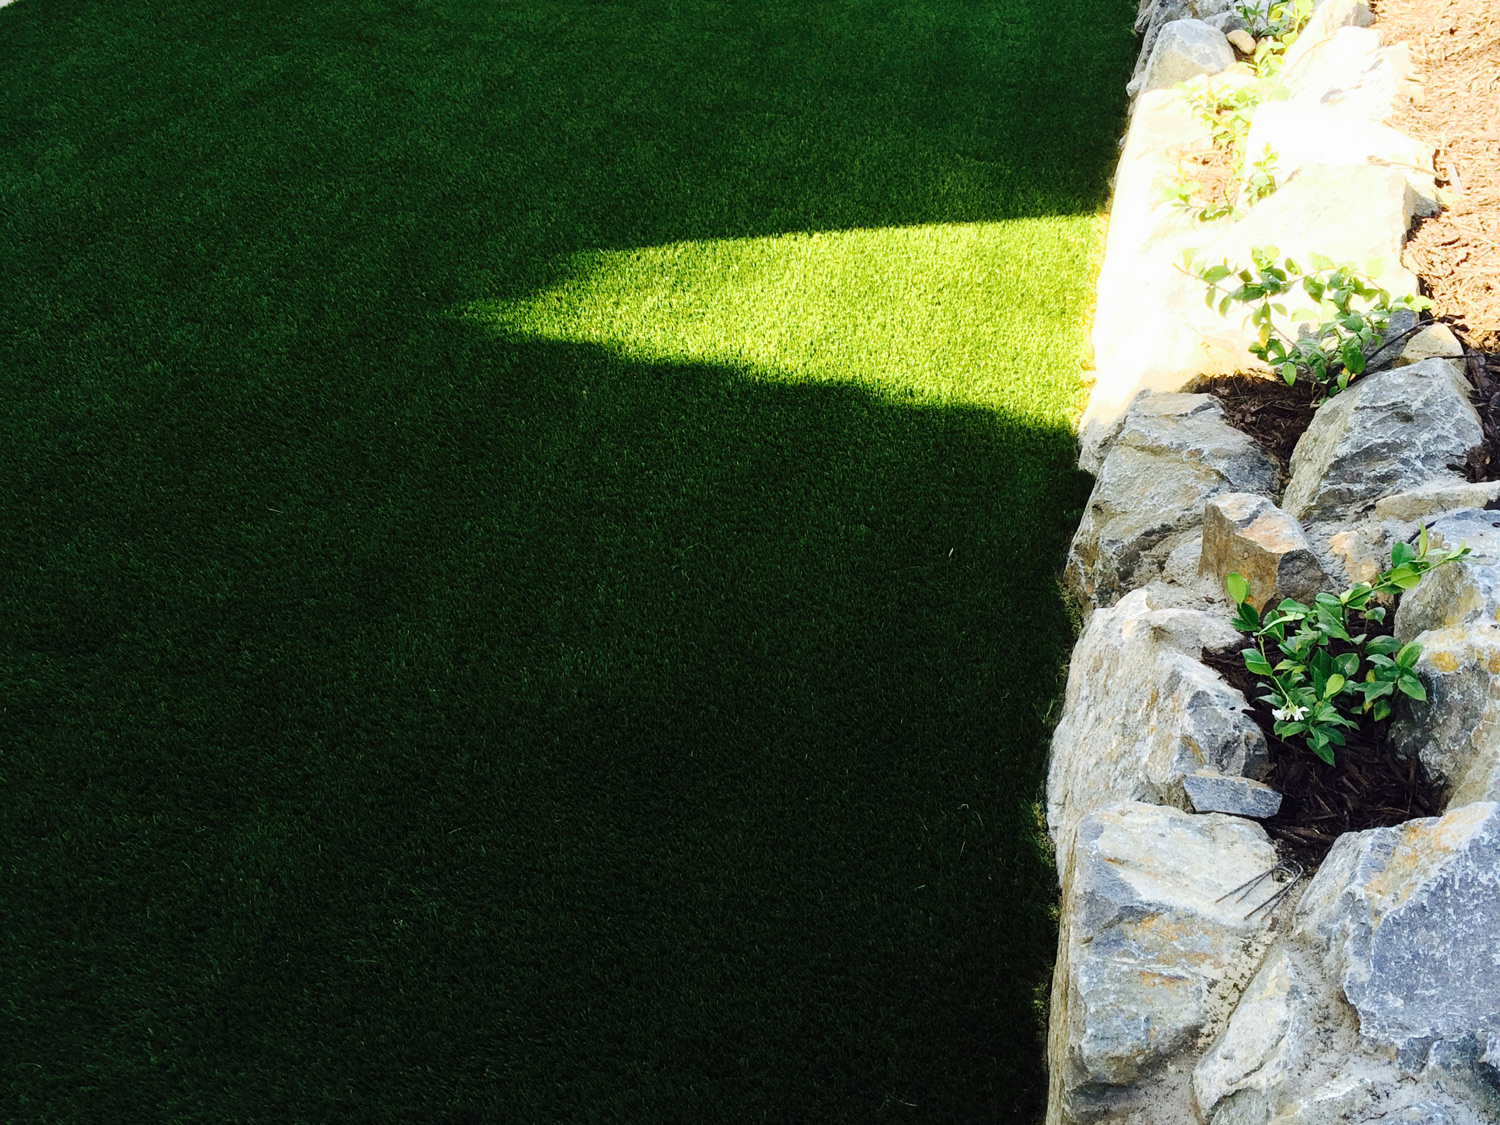 Backyard landscaping with green grass and hillside mulch beds and plants.